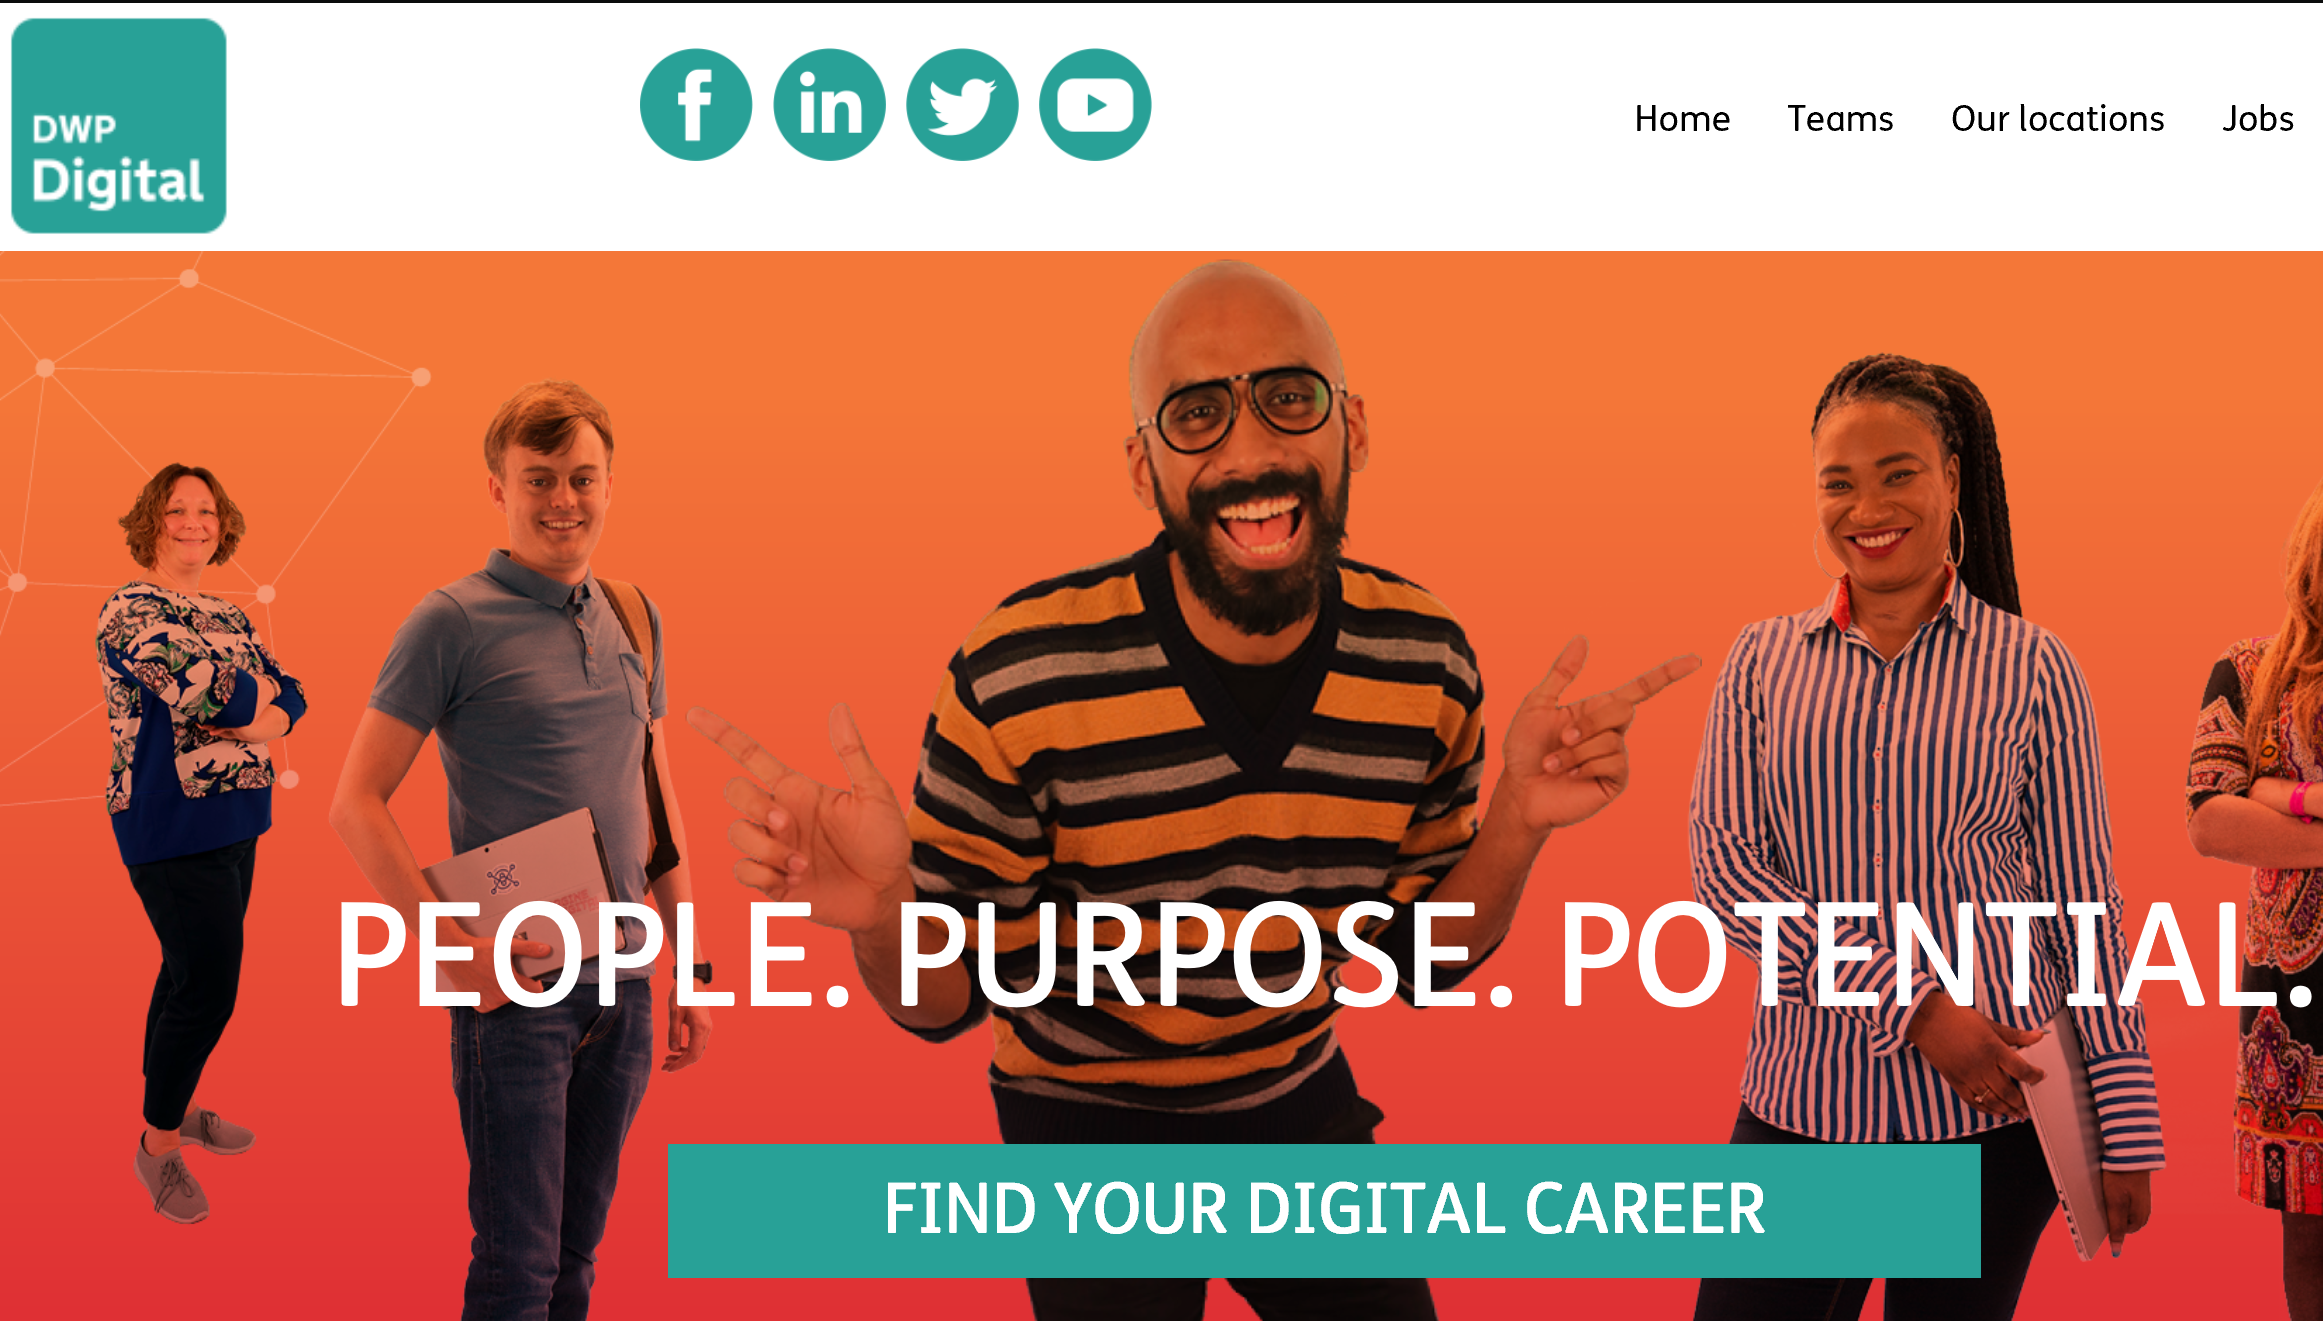 Image of the first page of the DWP Digital Careers website